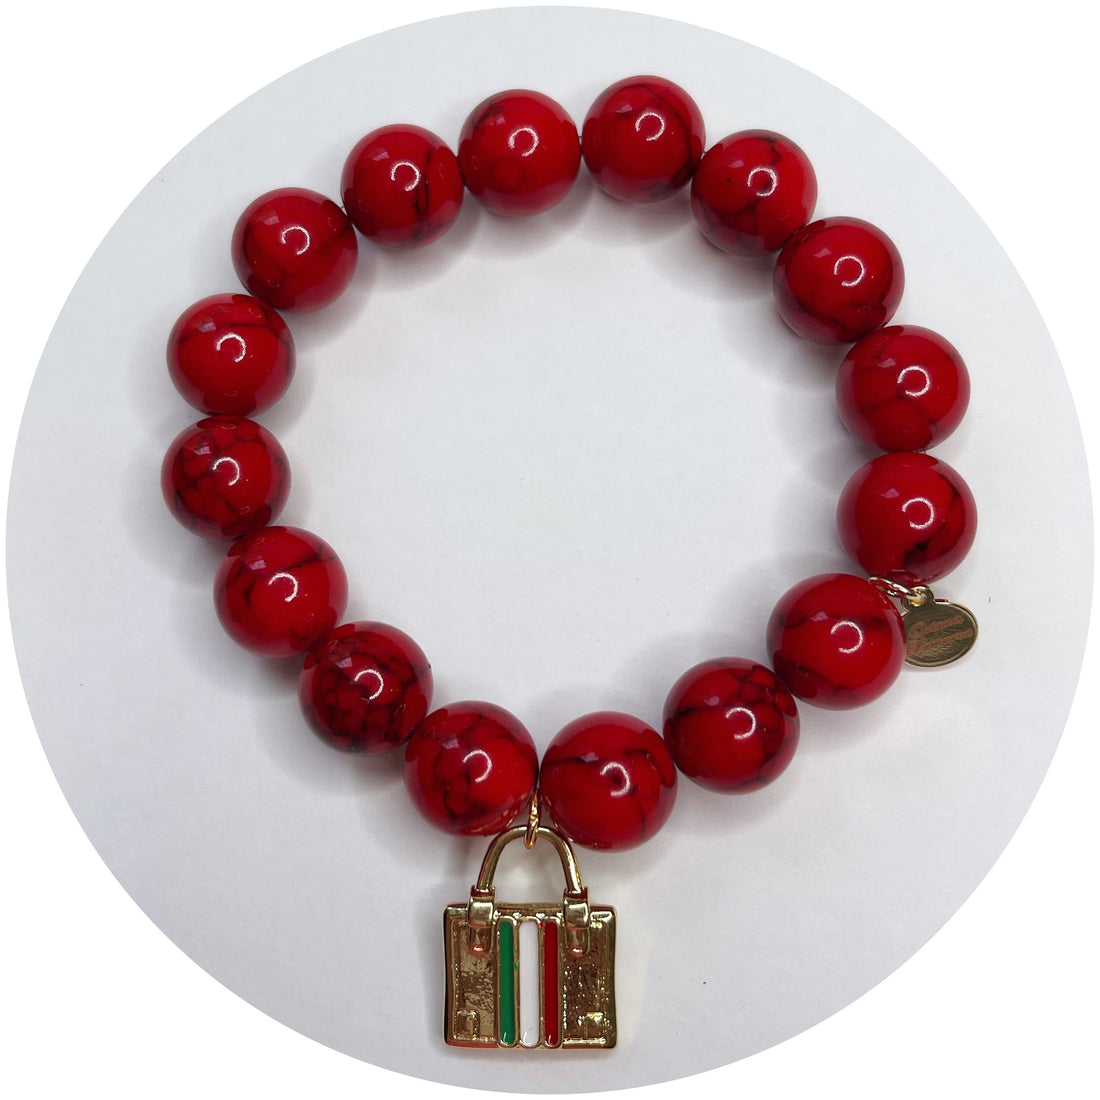 Red Howlite with Italian Luggage Pendant